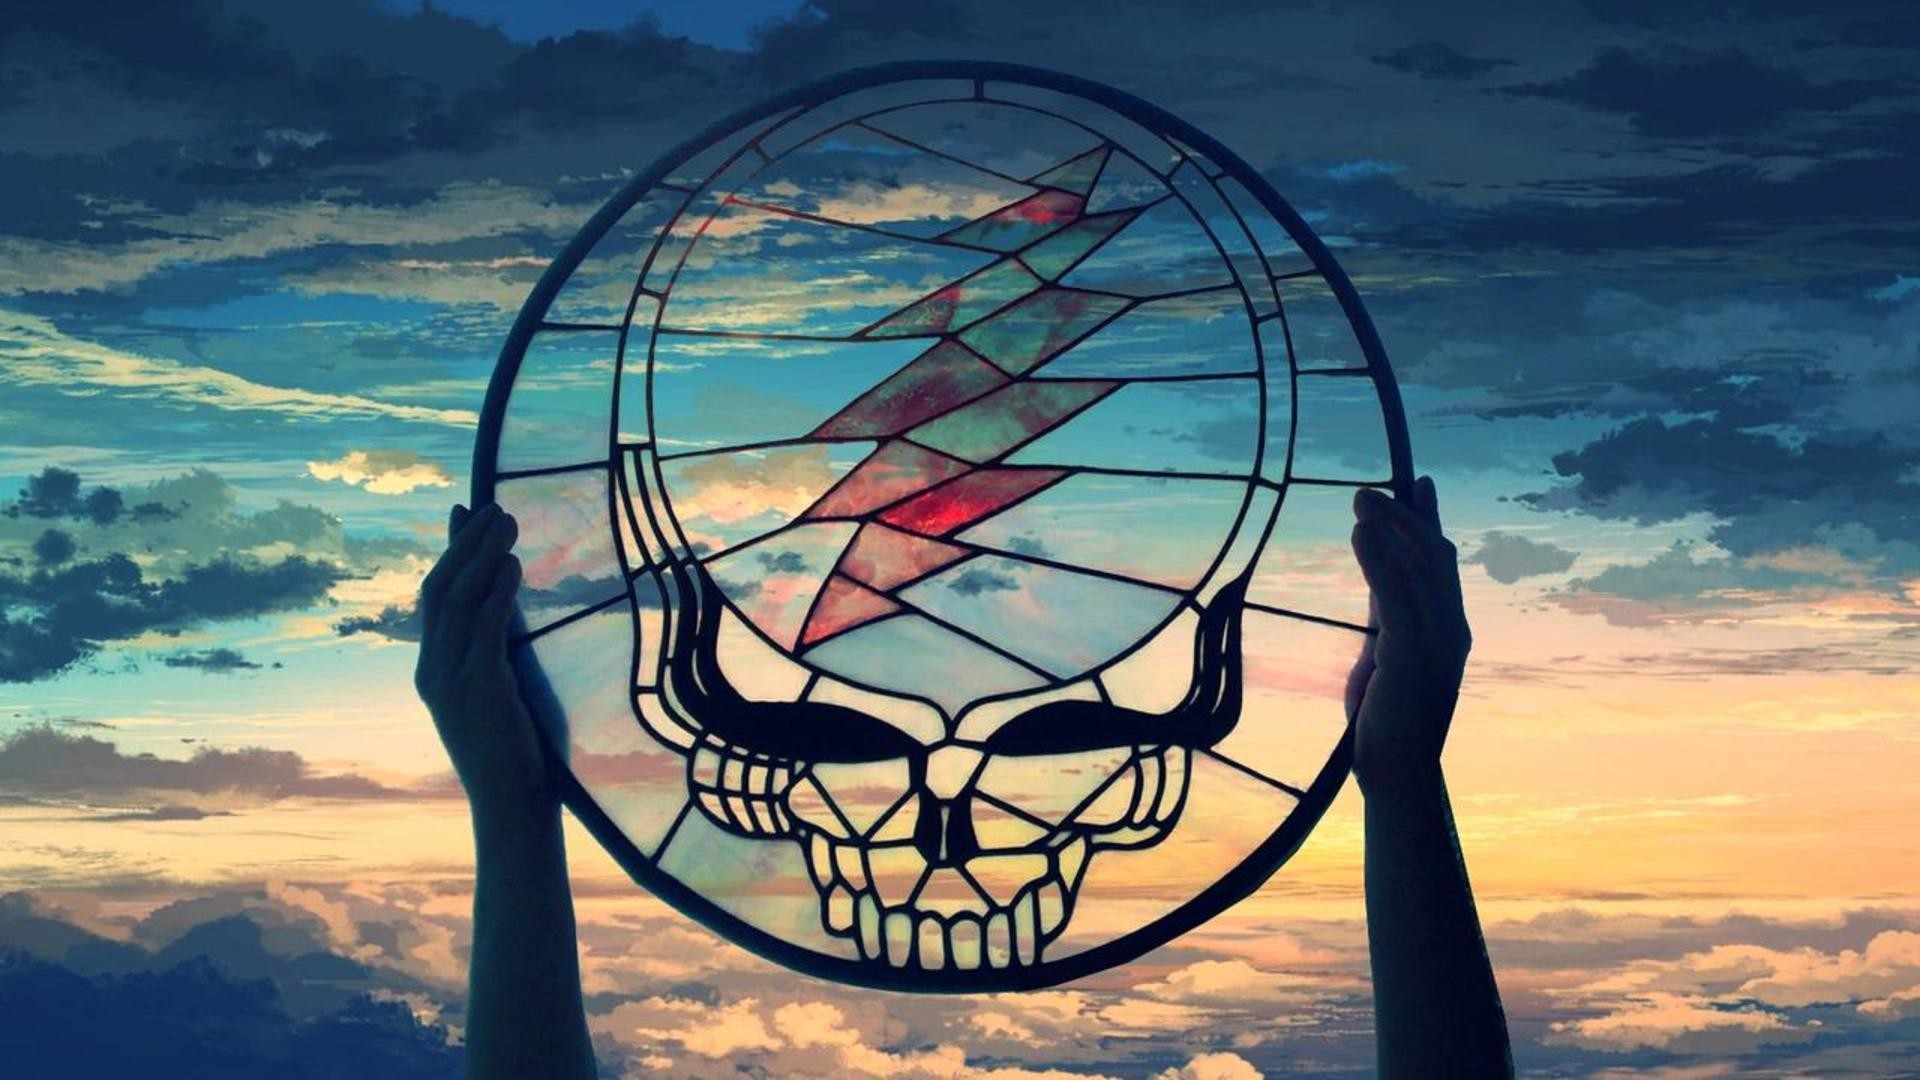 Grateful Dead (Stained Glass Stealie) over Painted Sky[.